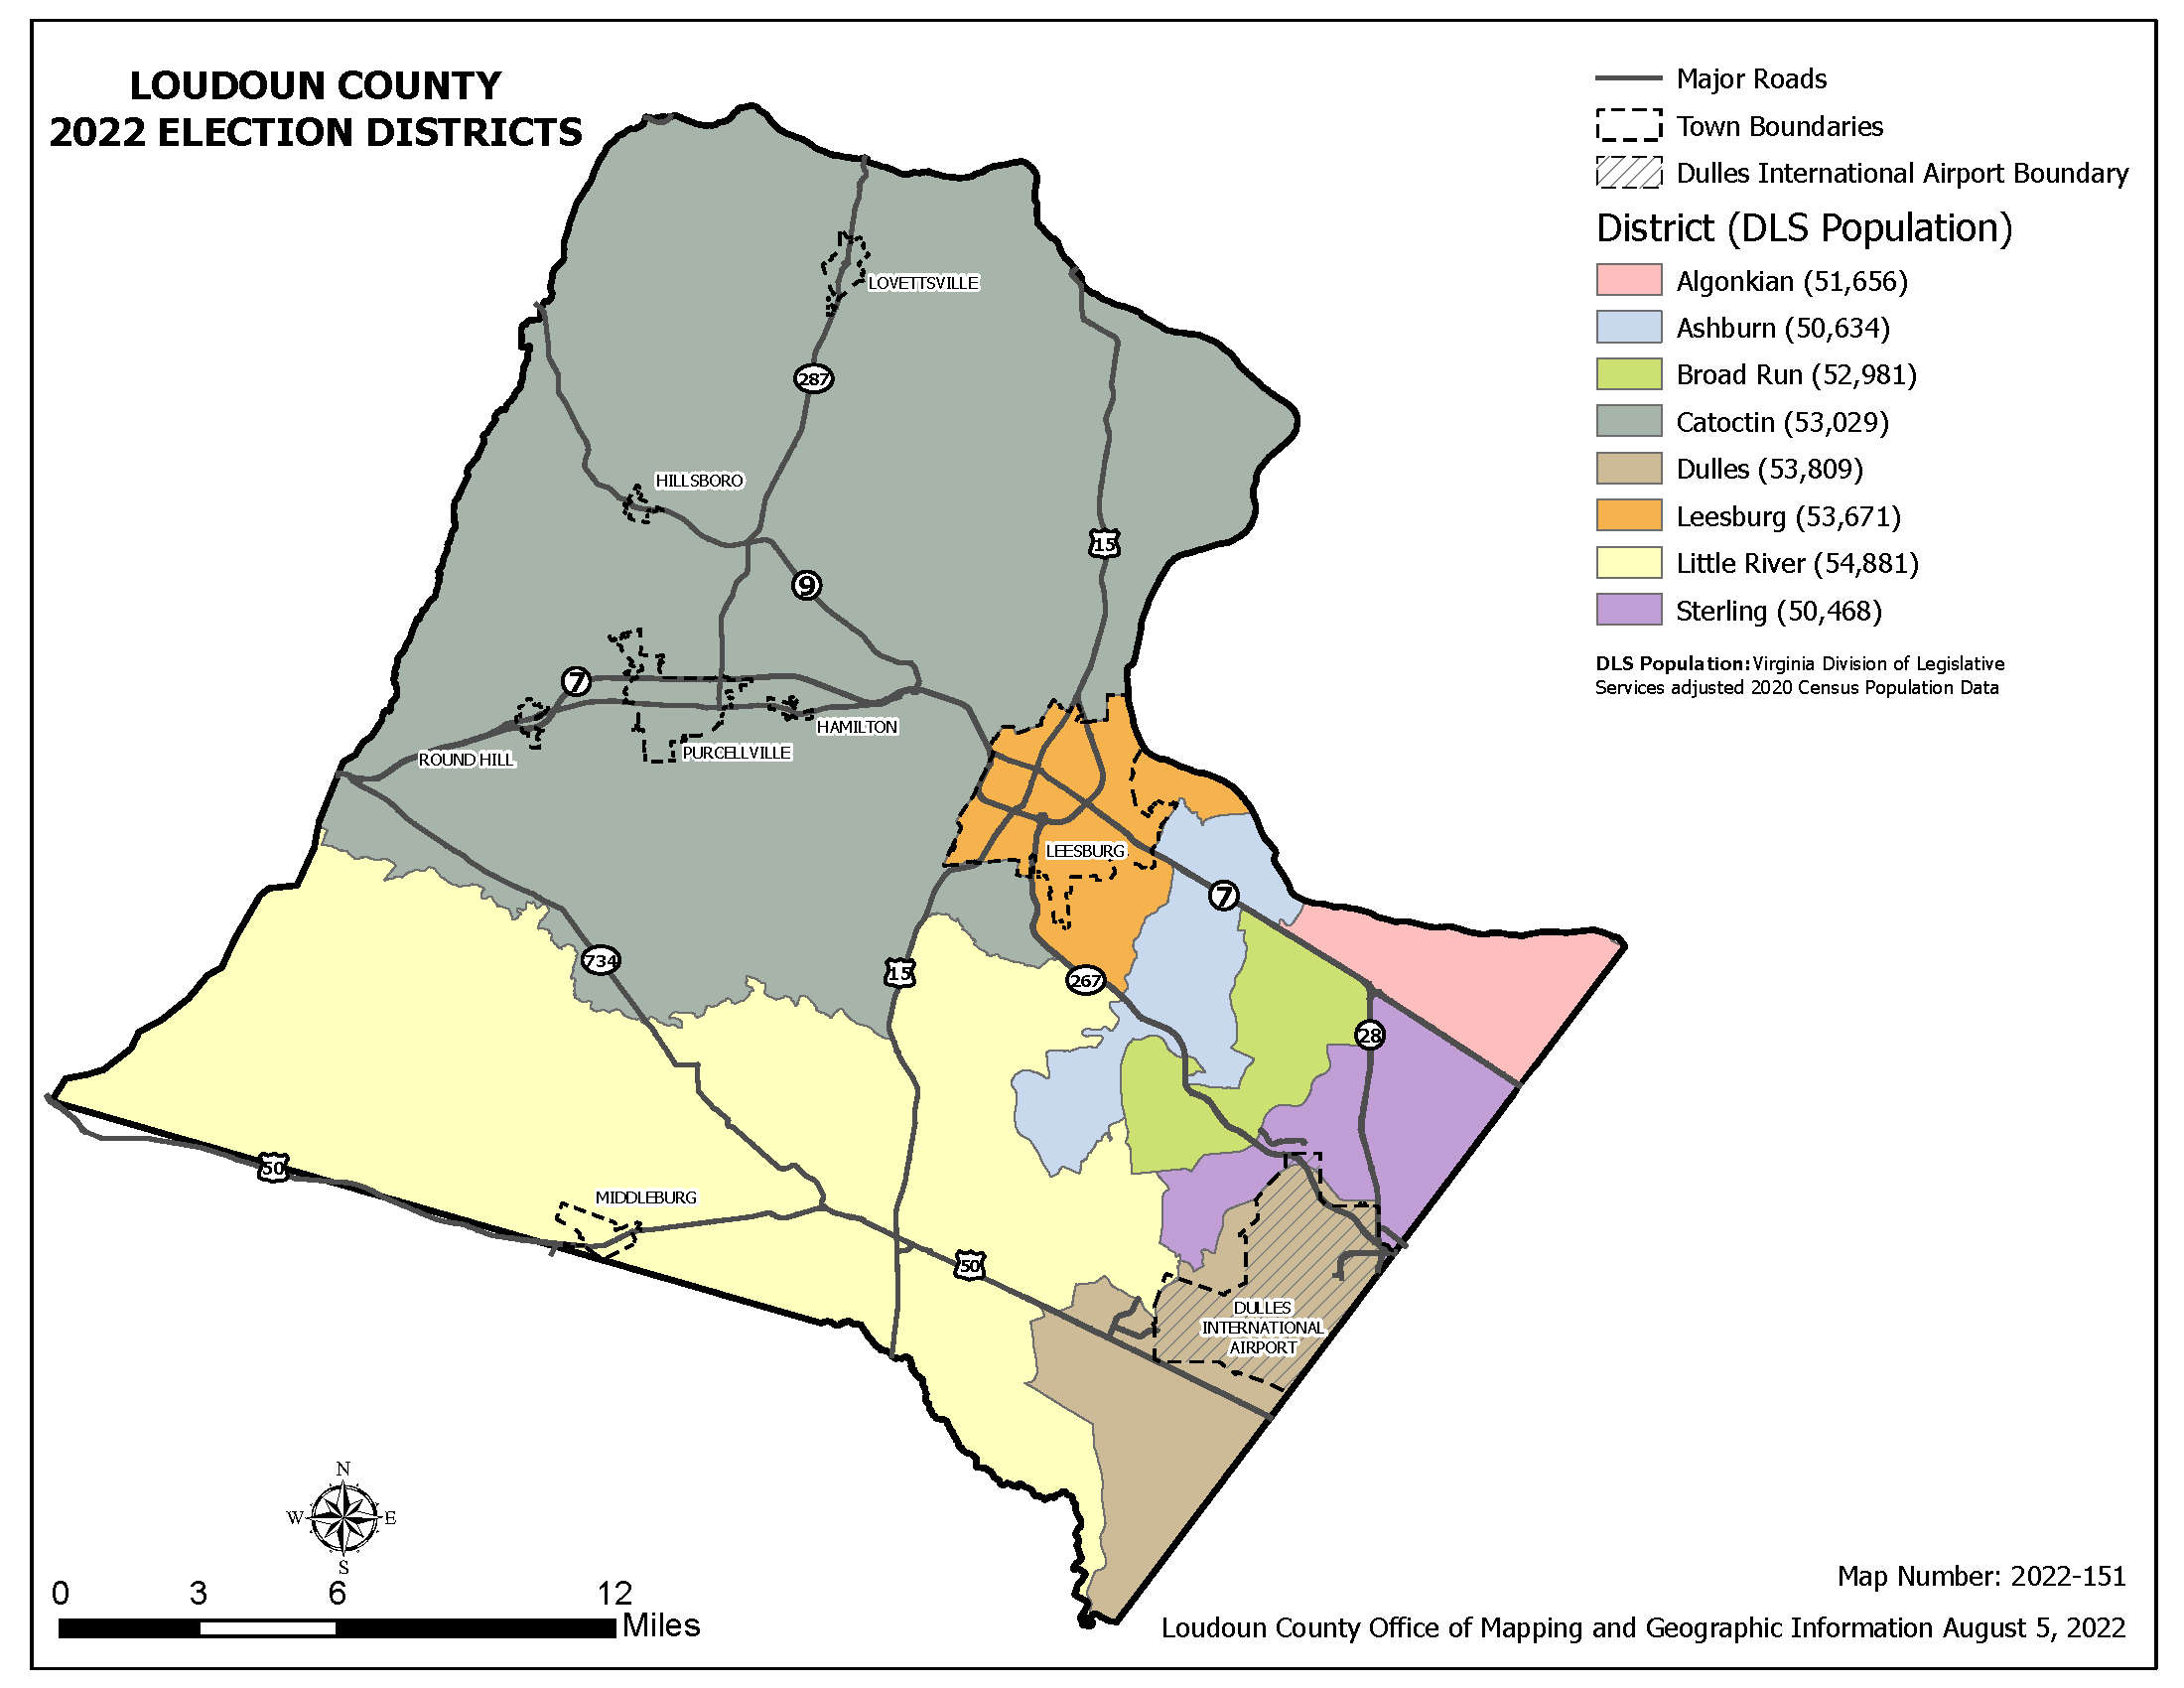 Link to image of 2022 Loudoun County Election Districts